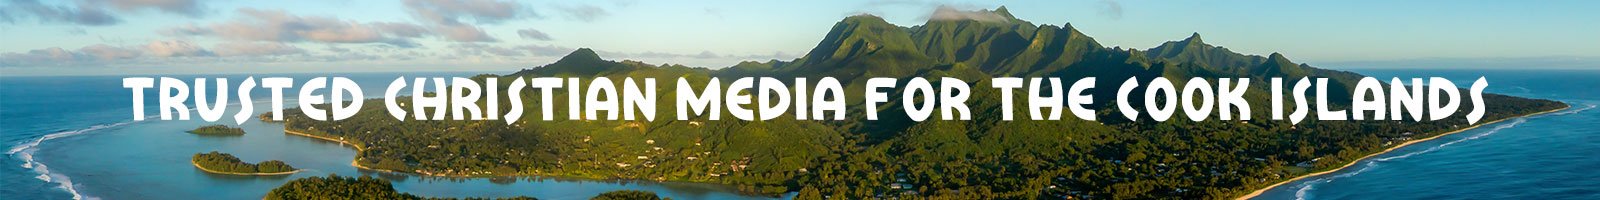 Trusted Christian Media for the Cook Islands